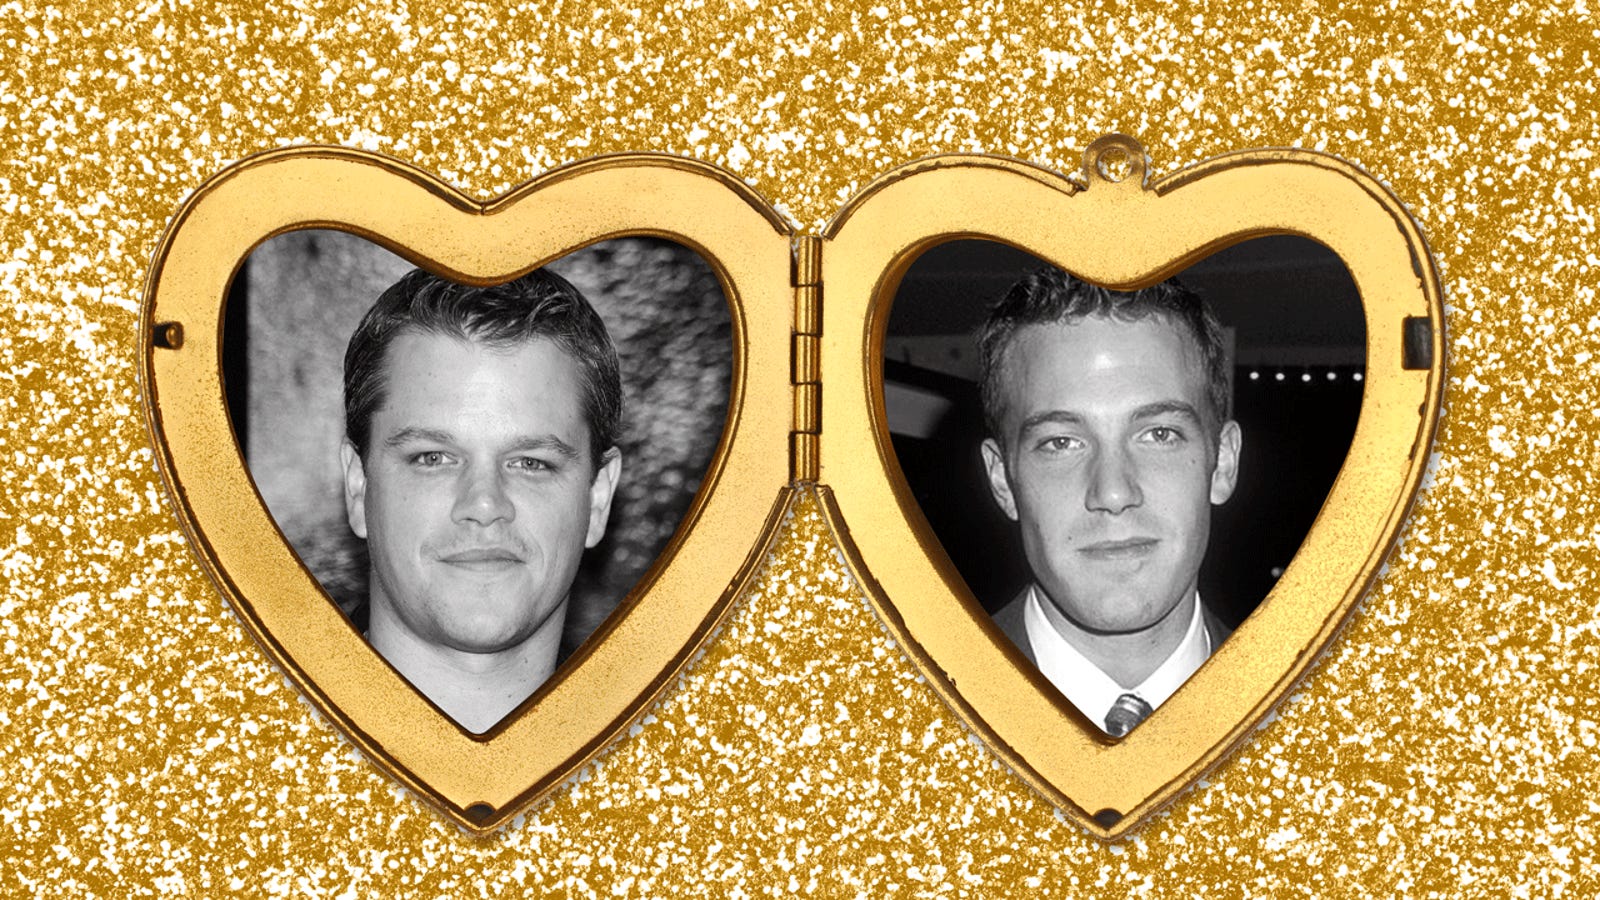 Matt Damon Is Here To Make Friends 11 Movies Where The Actor Images, Photos, Reviews